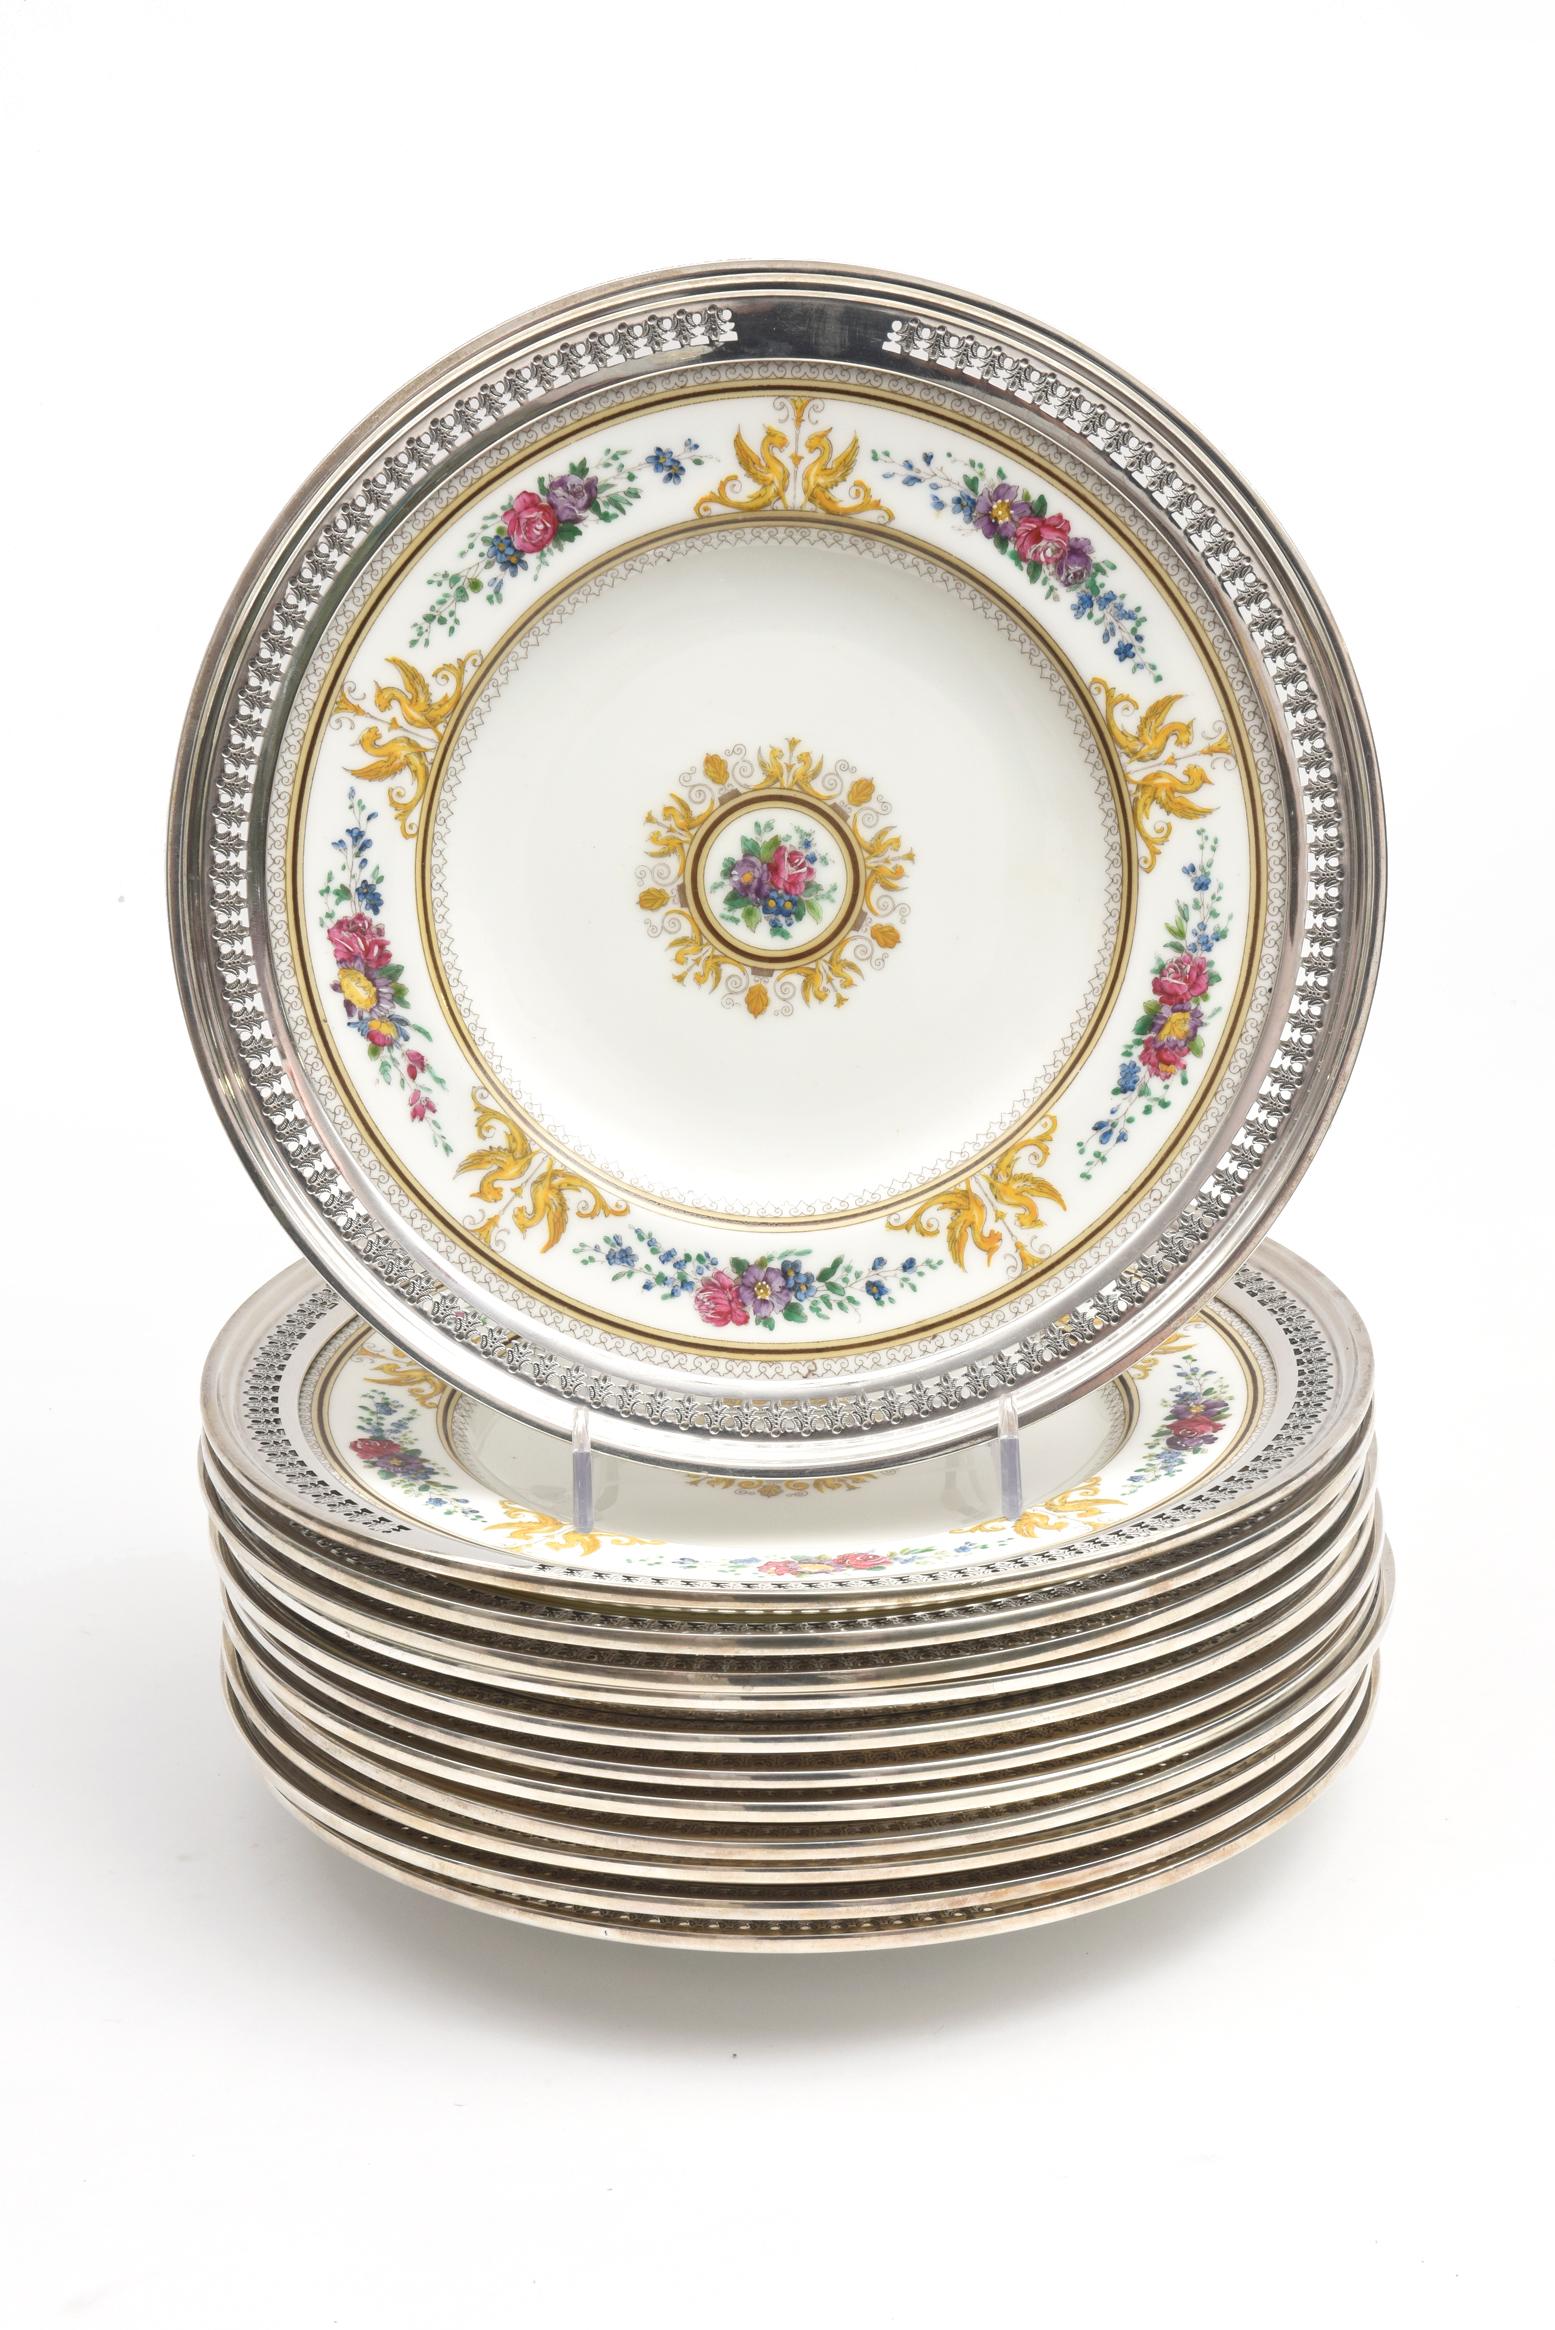 English Wedgwood Porcelain & Sterling Silver Dessert Service, 12 Plates & 1 Pastry Plate